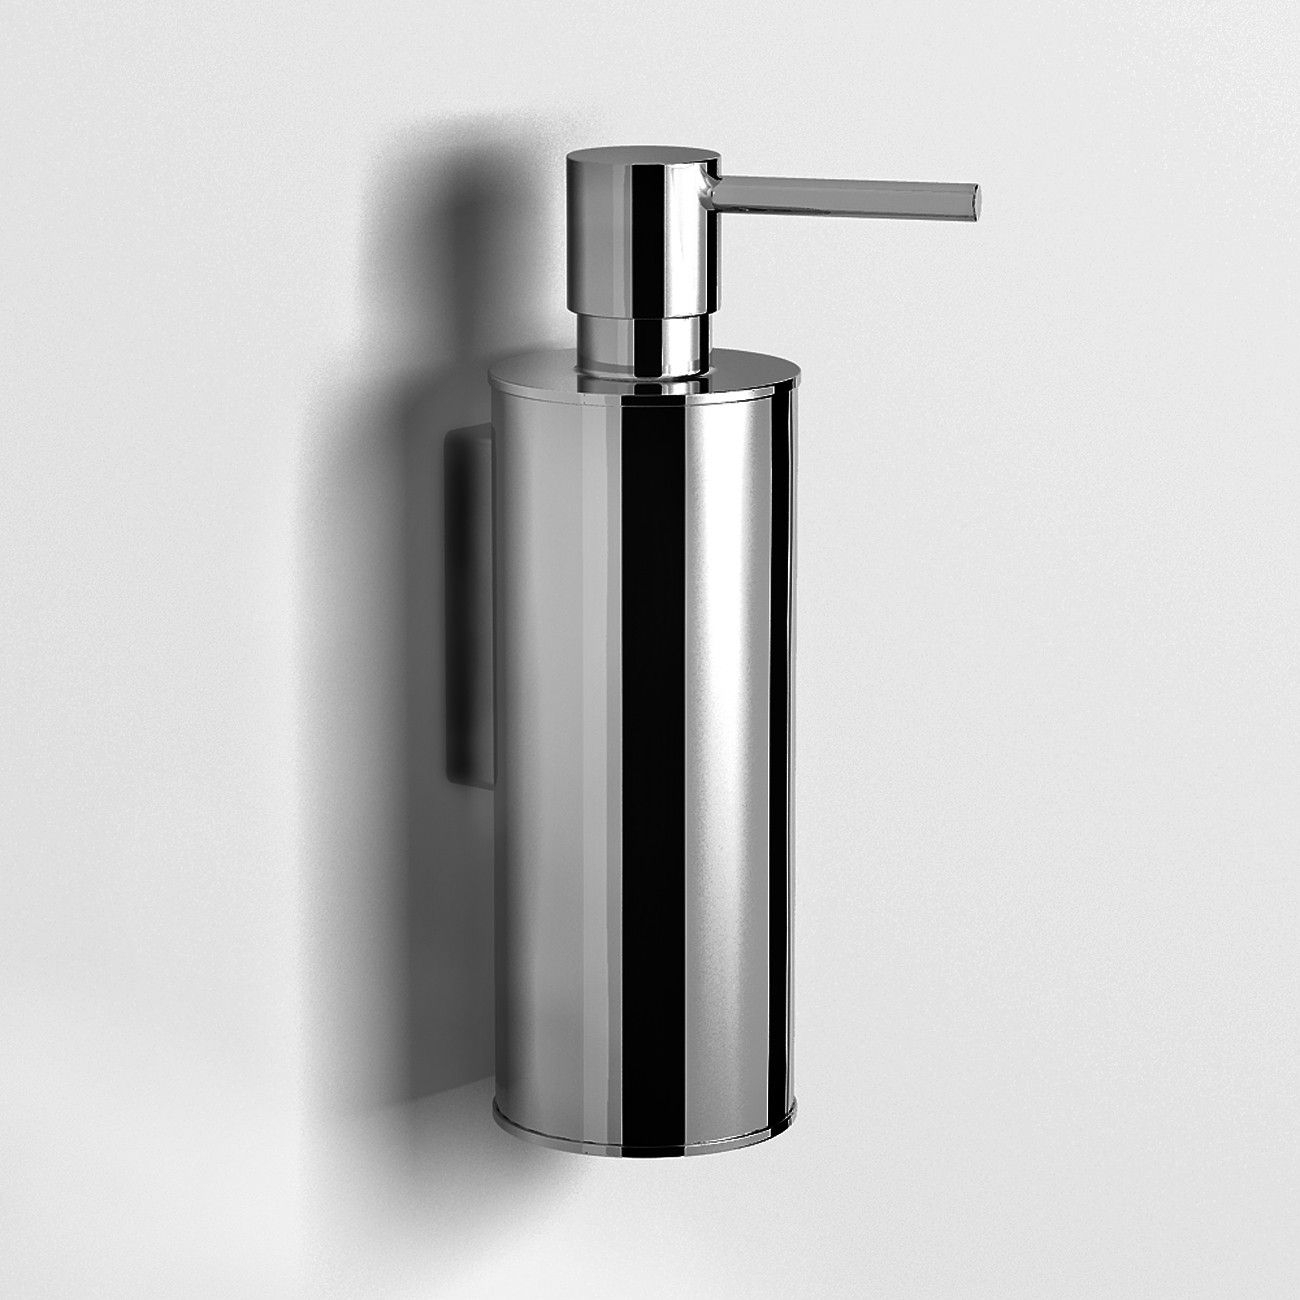 Refillable Wall Mounted Soap Dispenser